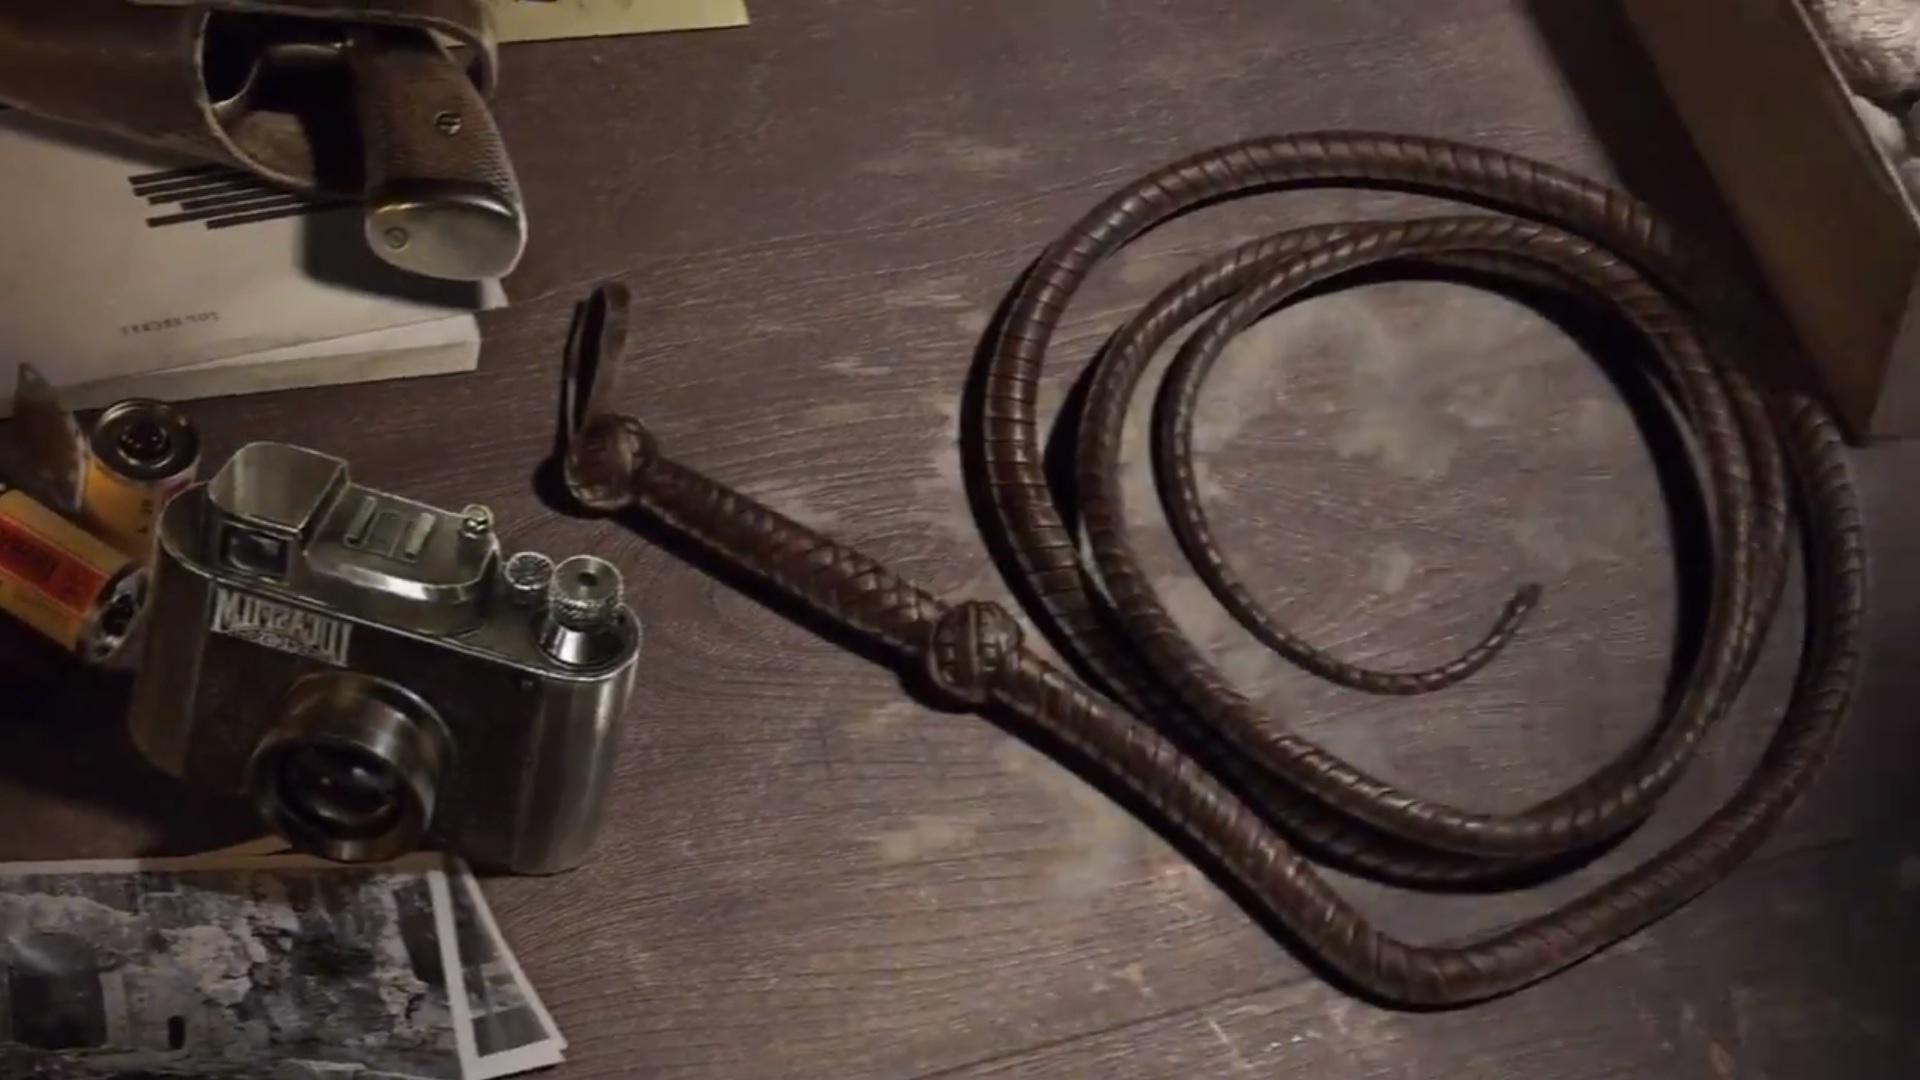 Indiana Jones Whip from the announcement trailer